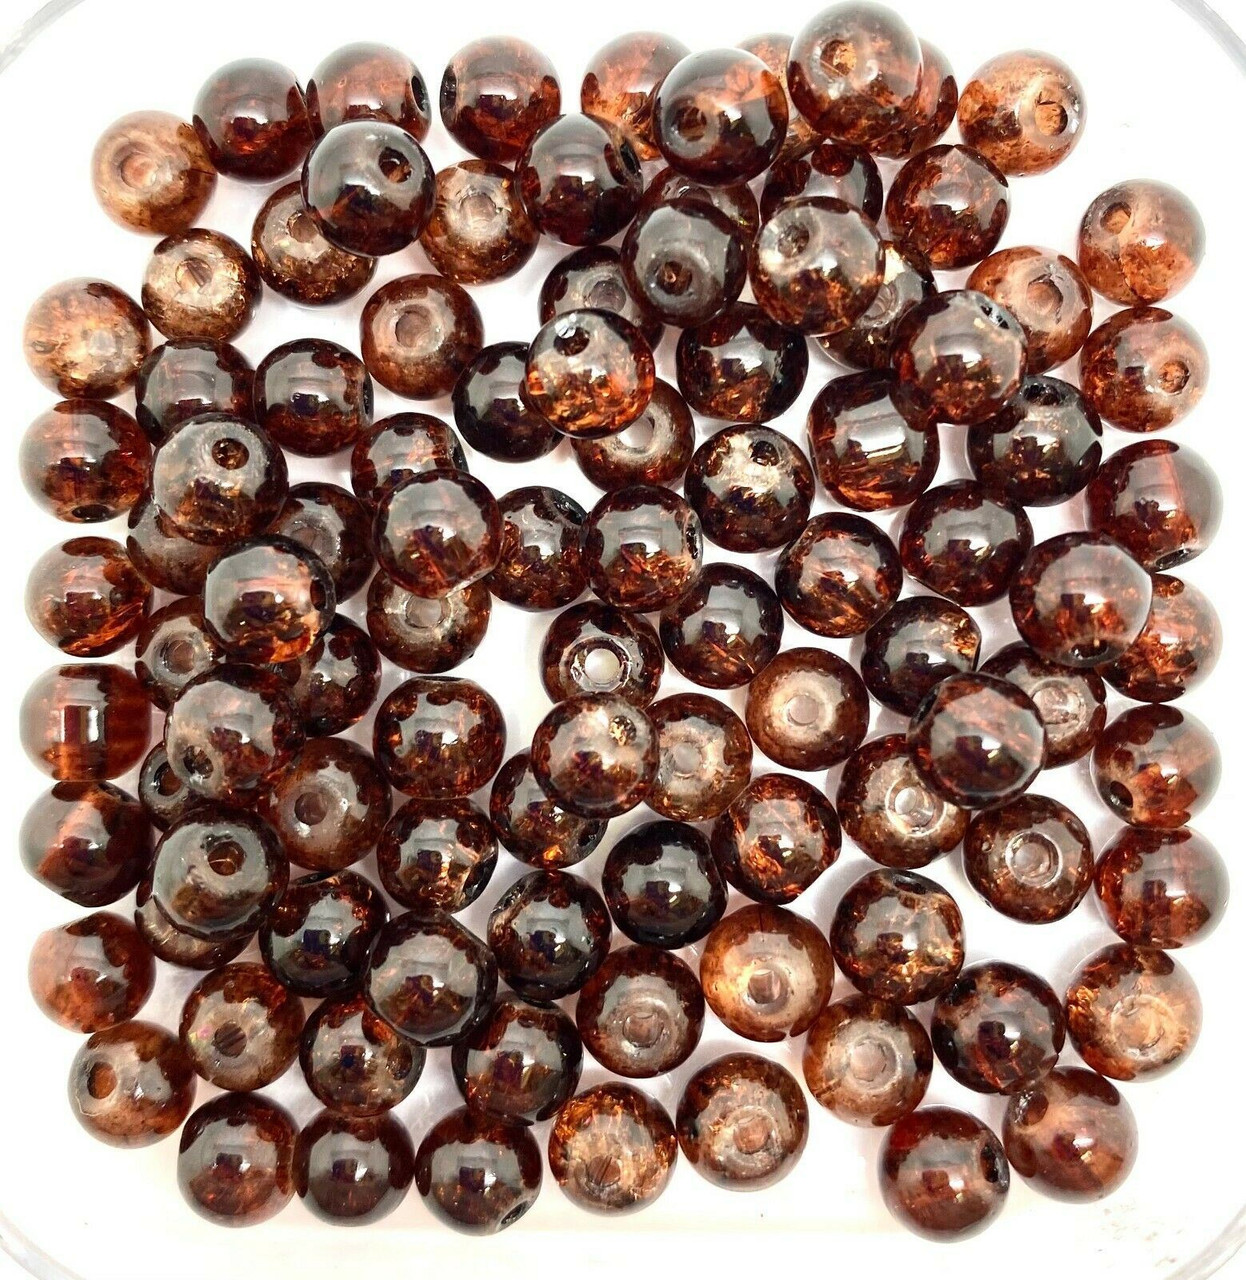 6mm Crackle Glass Beads - Brown, 100 beads